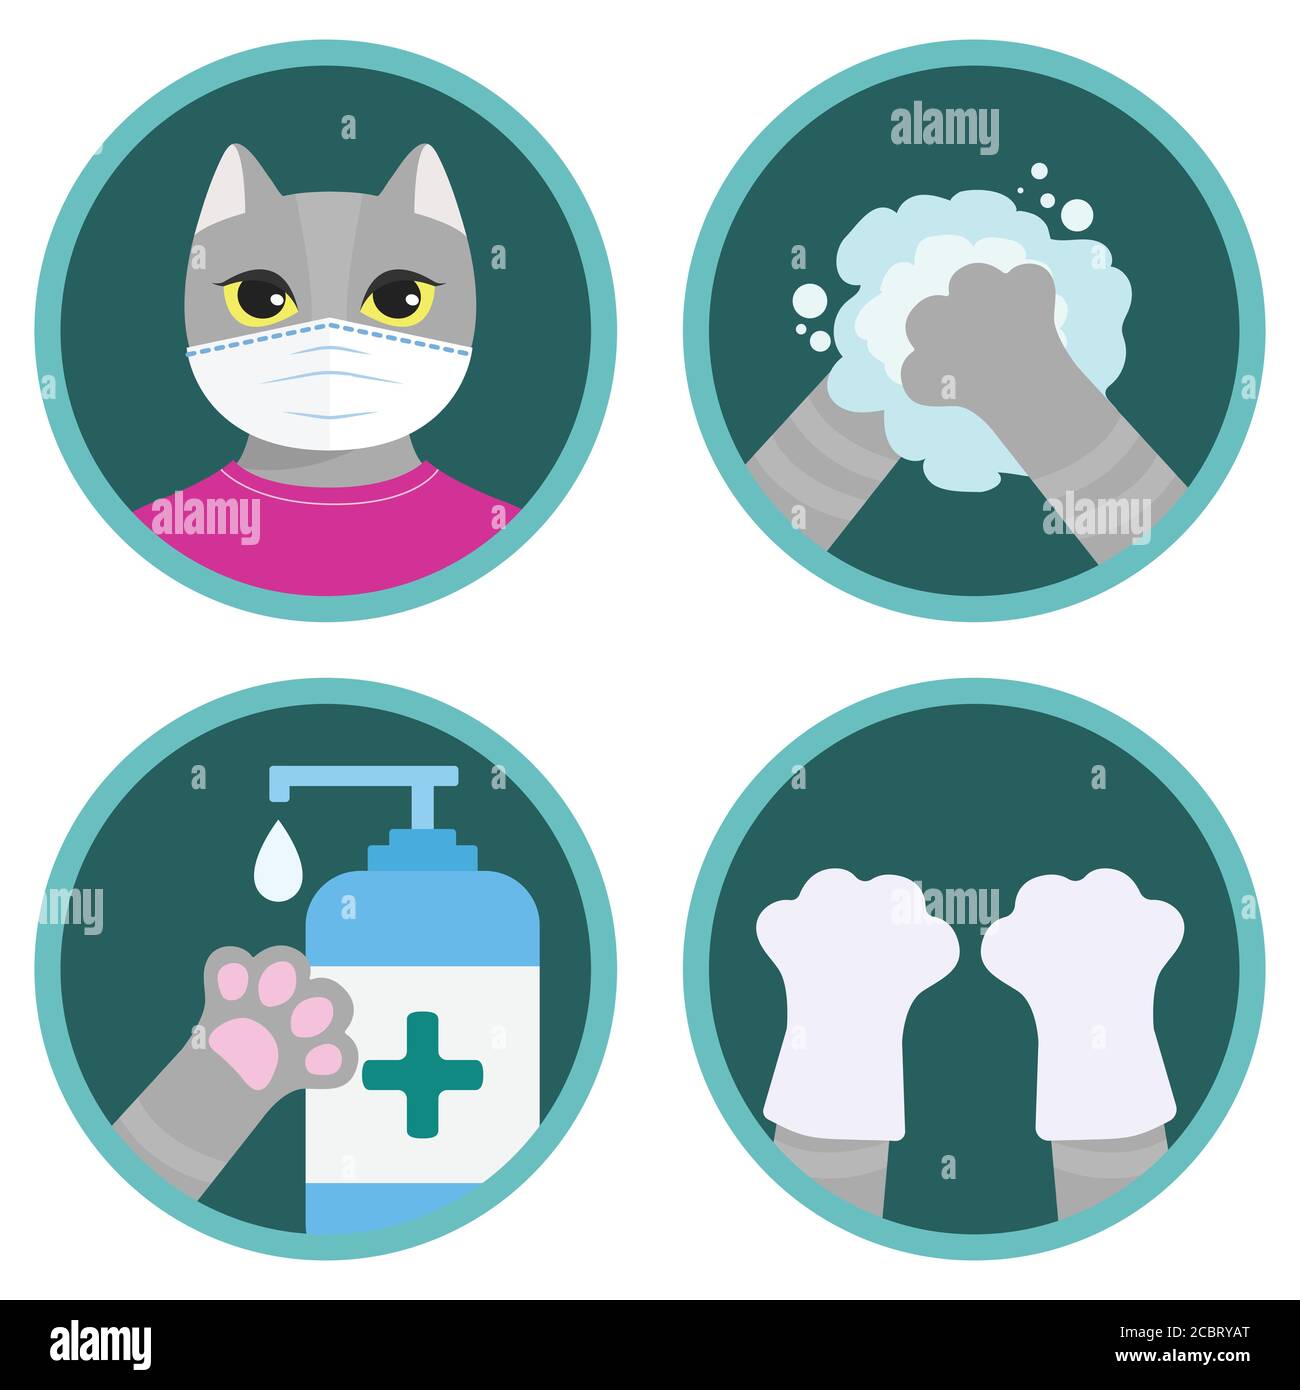 COVID-19 safety measures illustrated by cute cartoon cat. Icons